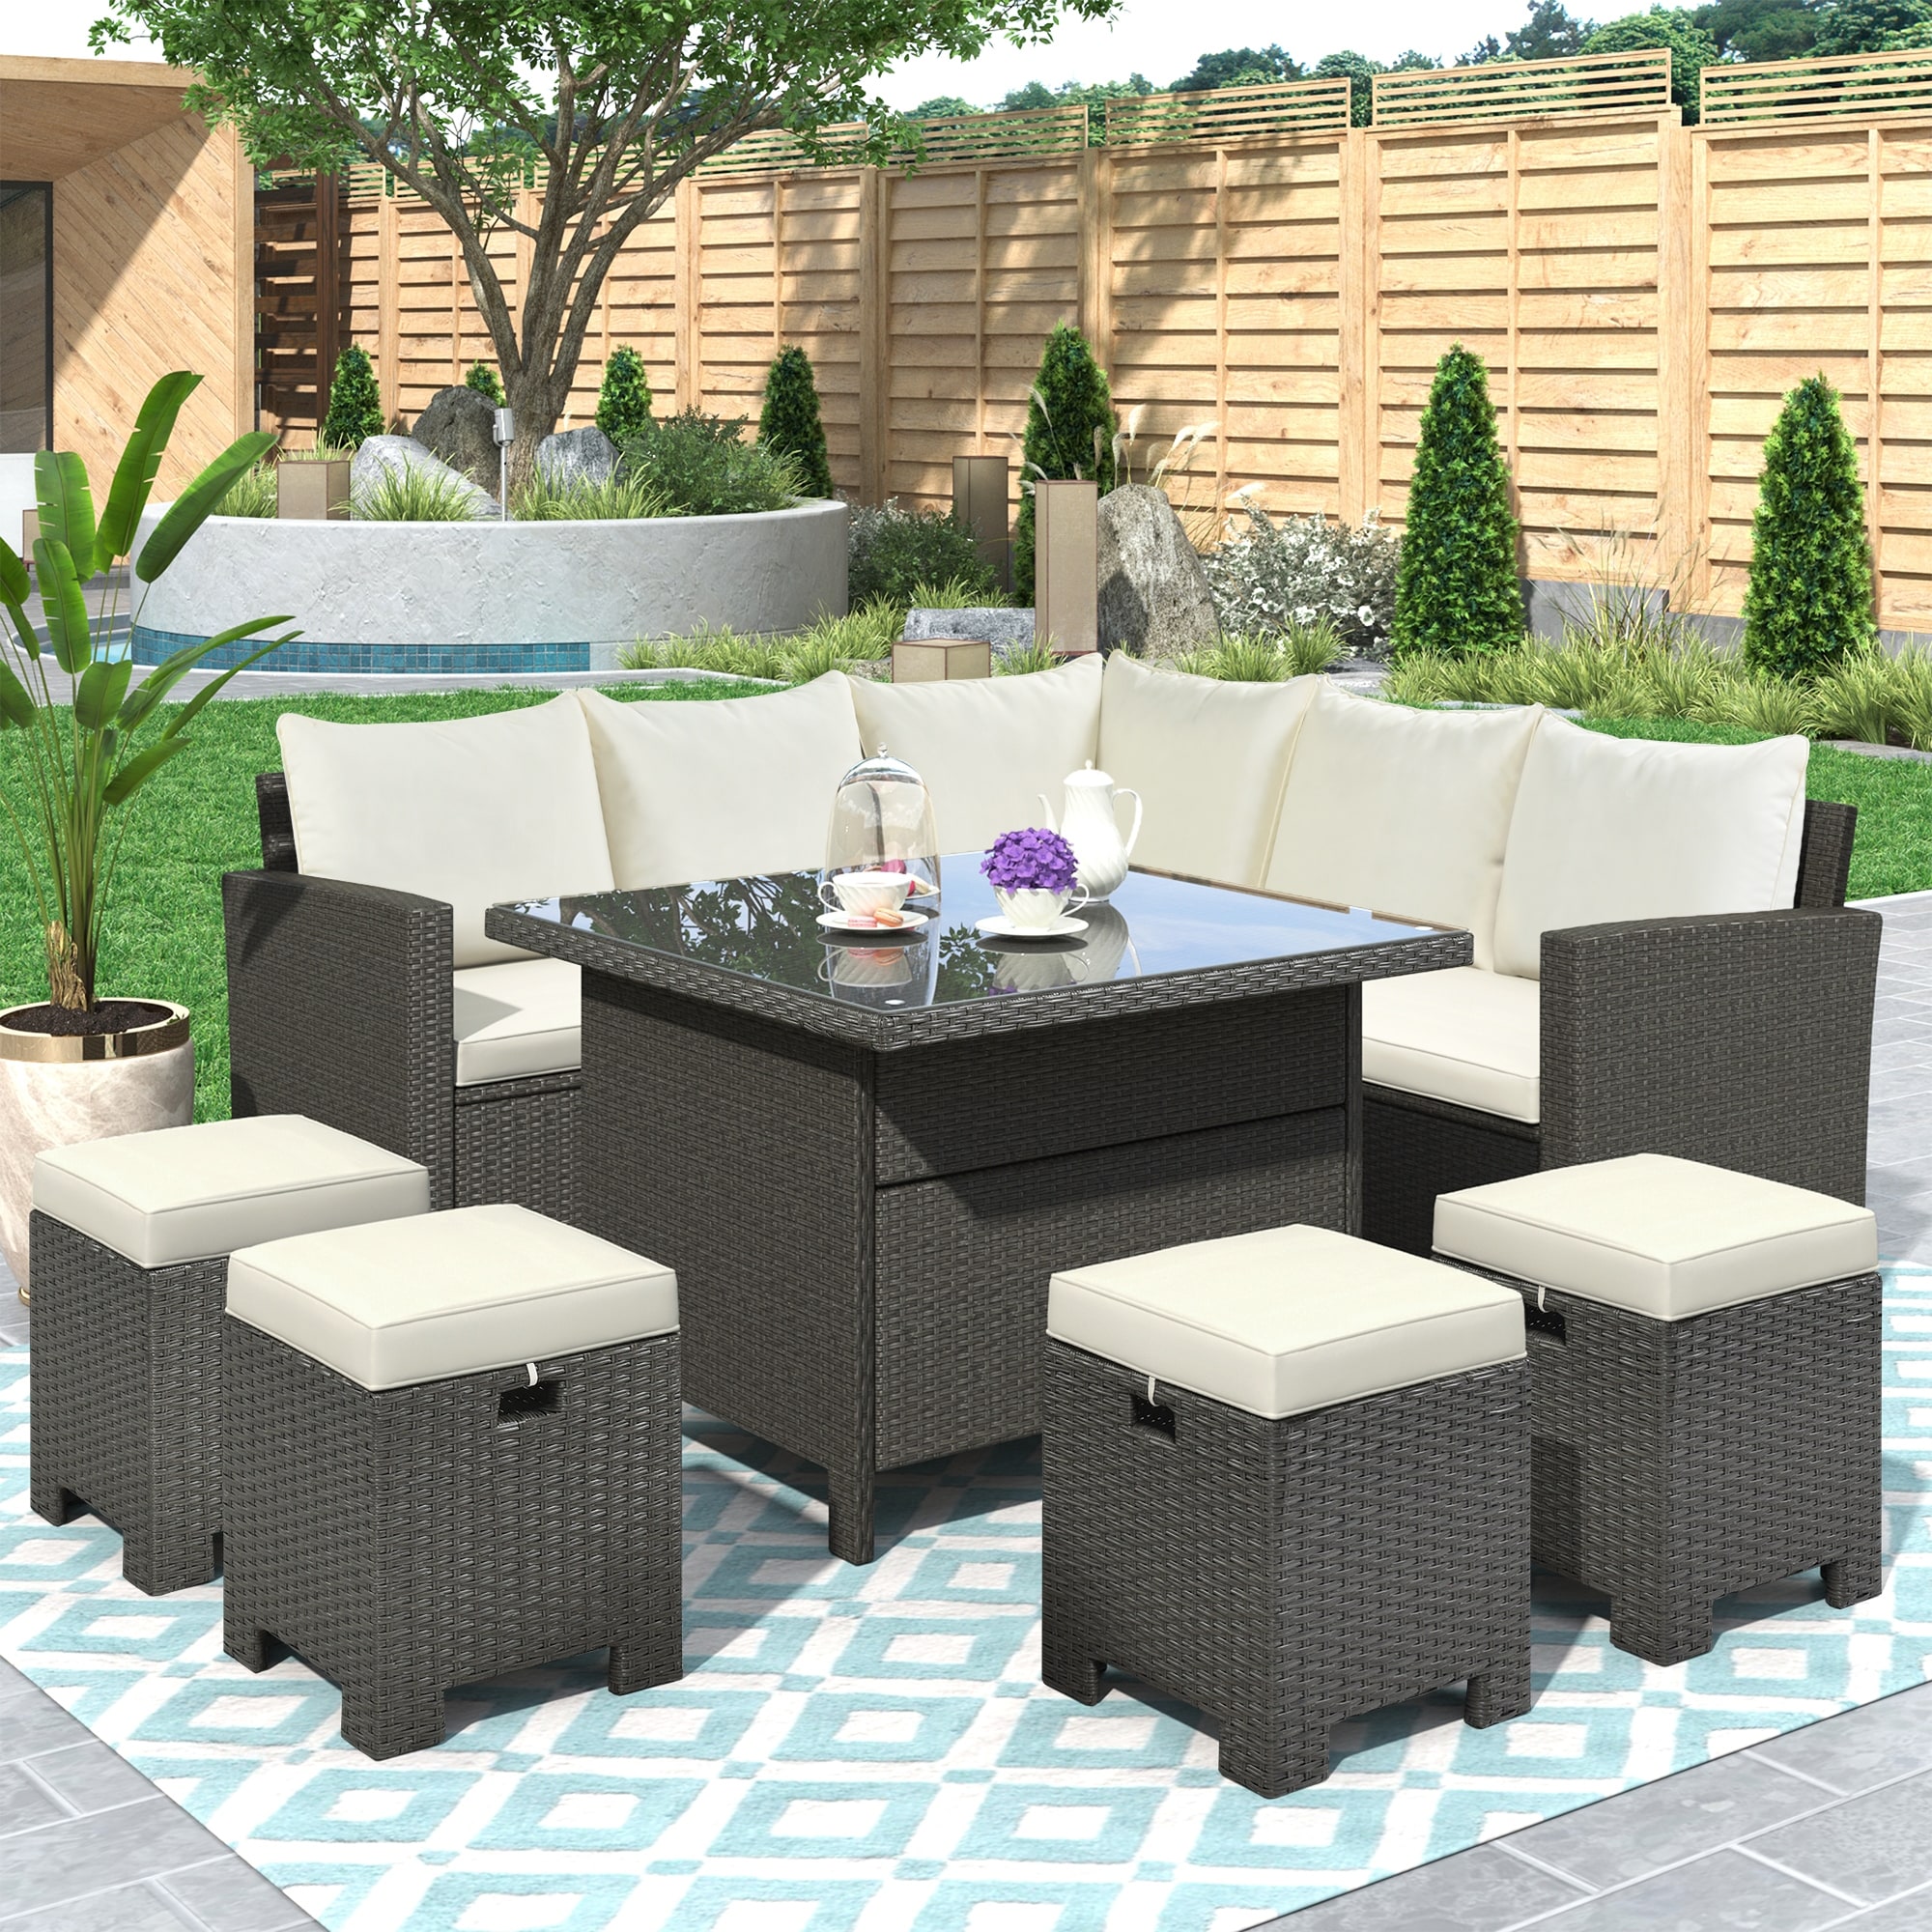 U_style Patio Furniture Set 8 Piece Outdoor Conversation Pe Rattan Sofa Set Dining Table Chair With Storage Ottoman Cushions